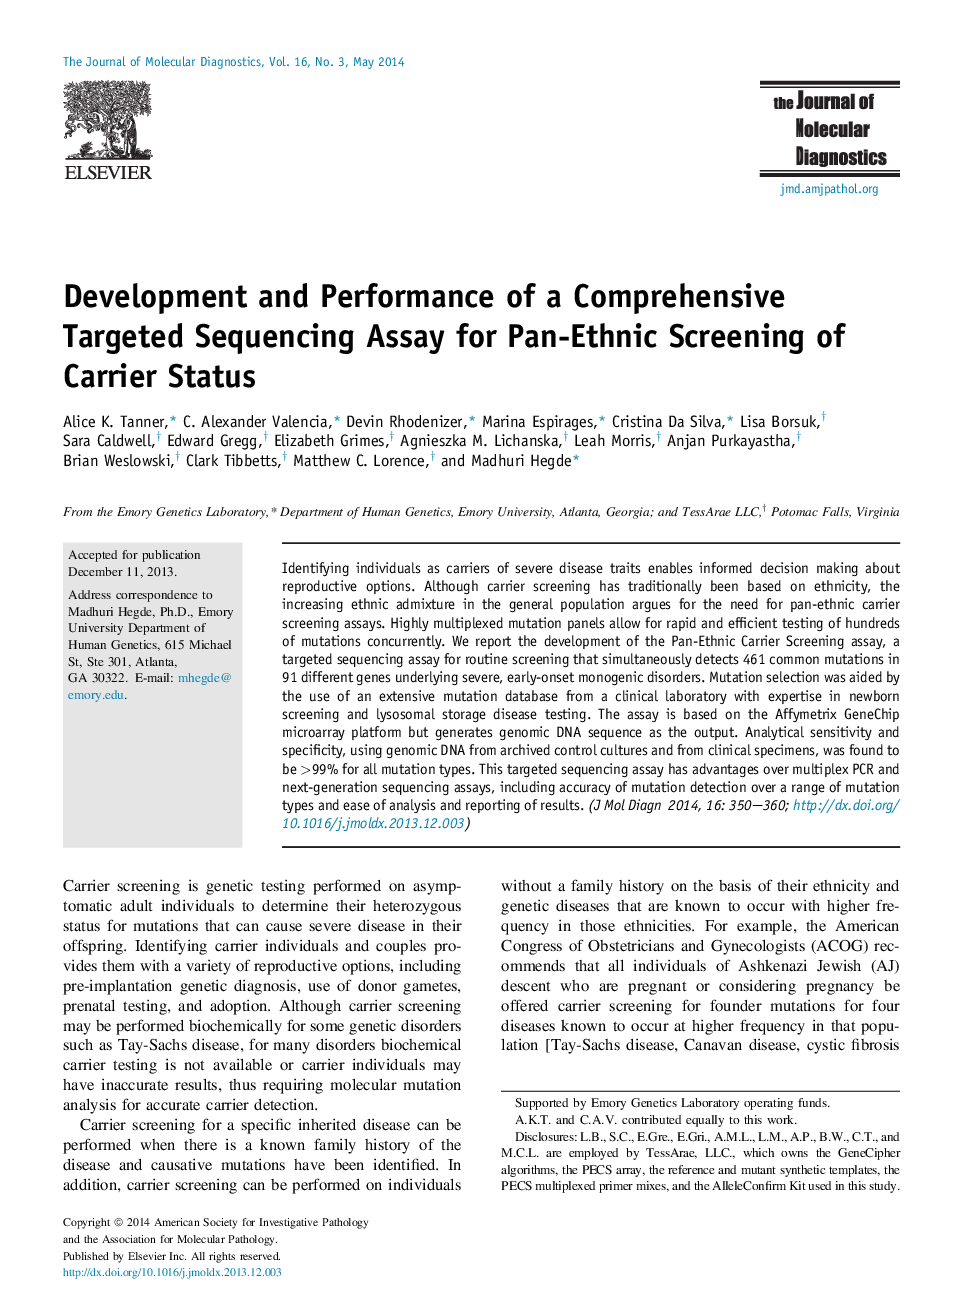 Regular articleDevelopment and Performance of a Comprehensive Targeted Sequencing Assay for Pan-Ethnic Screening of Carrier Status